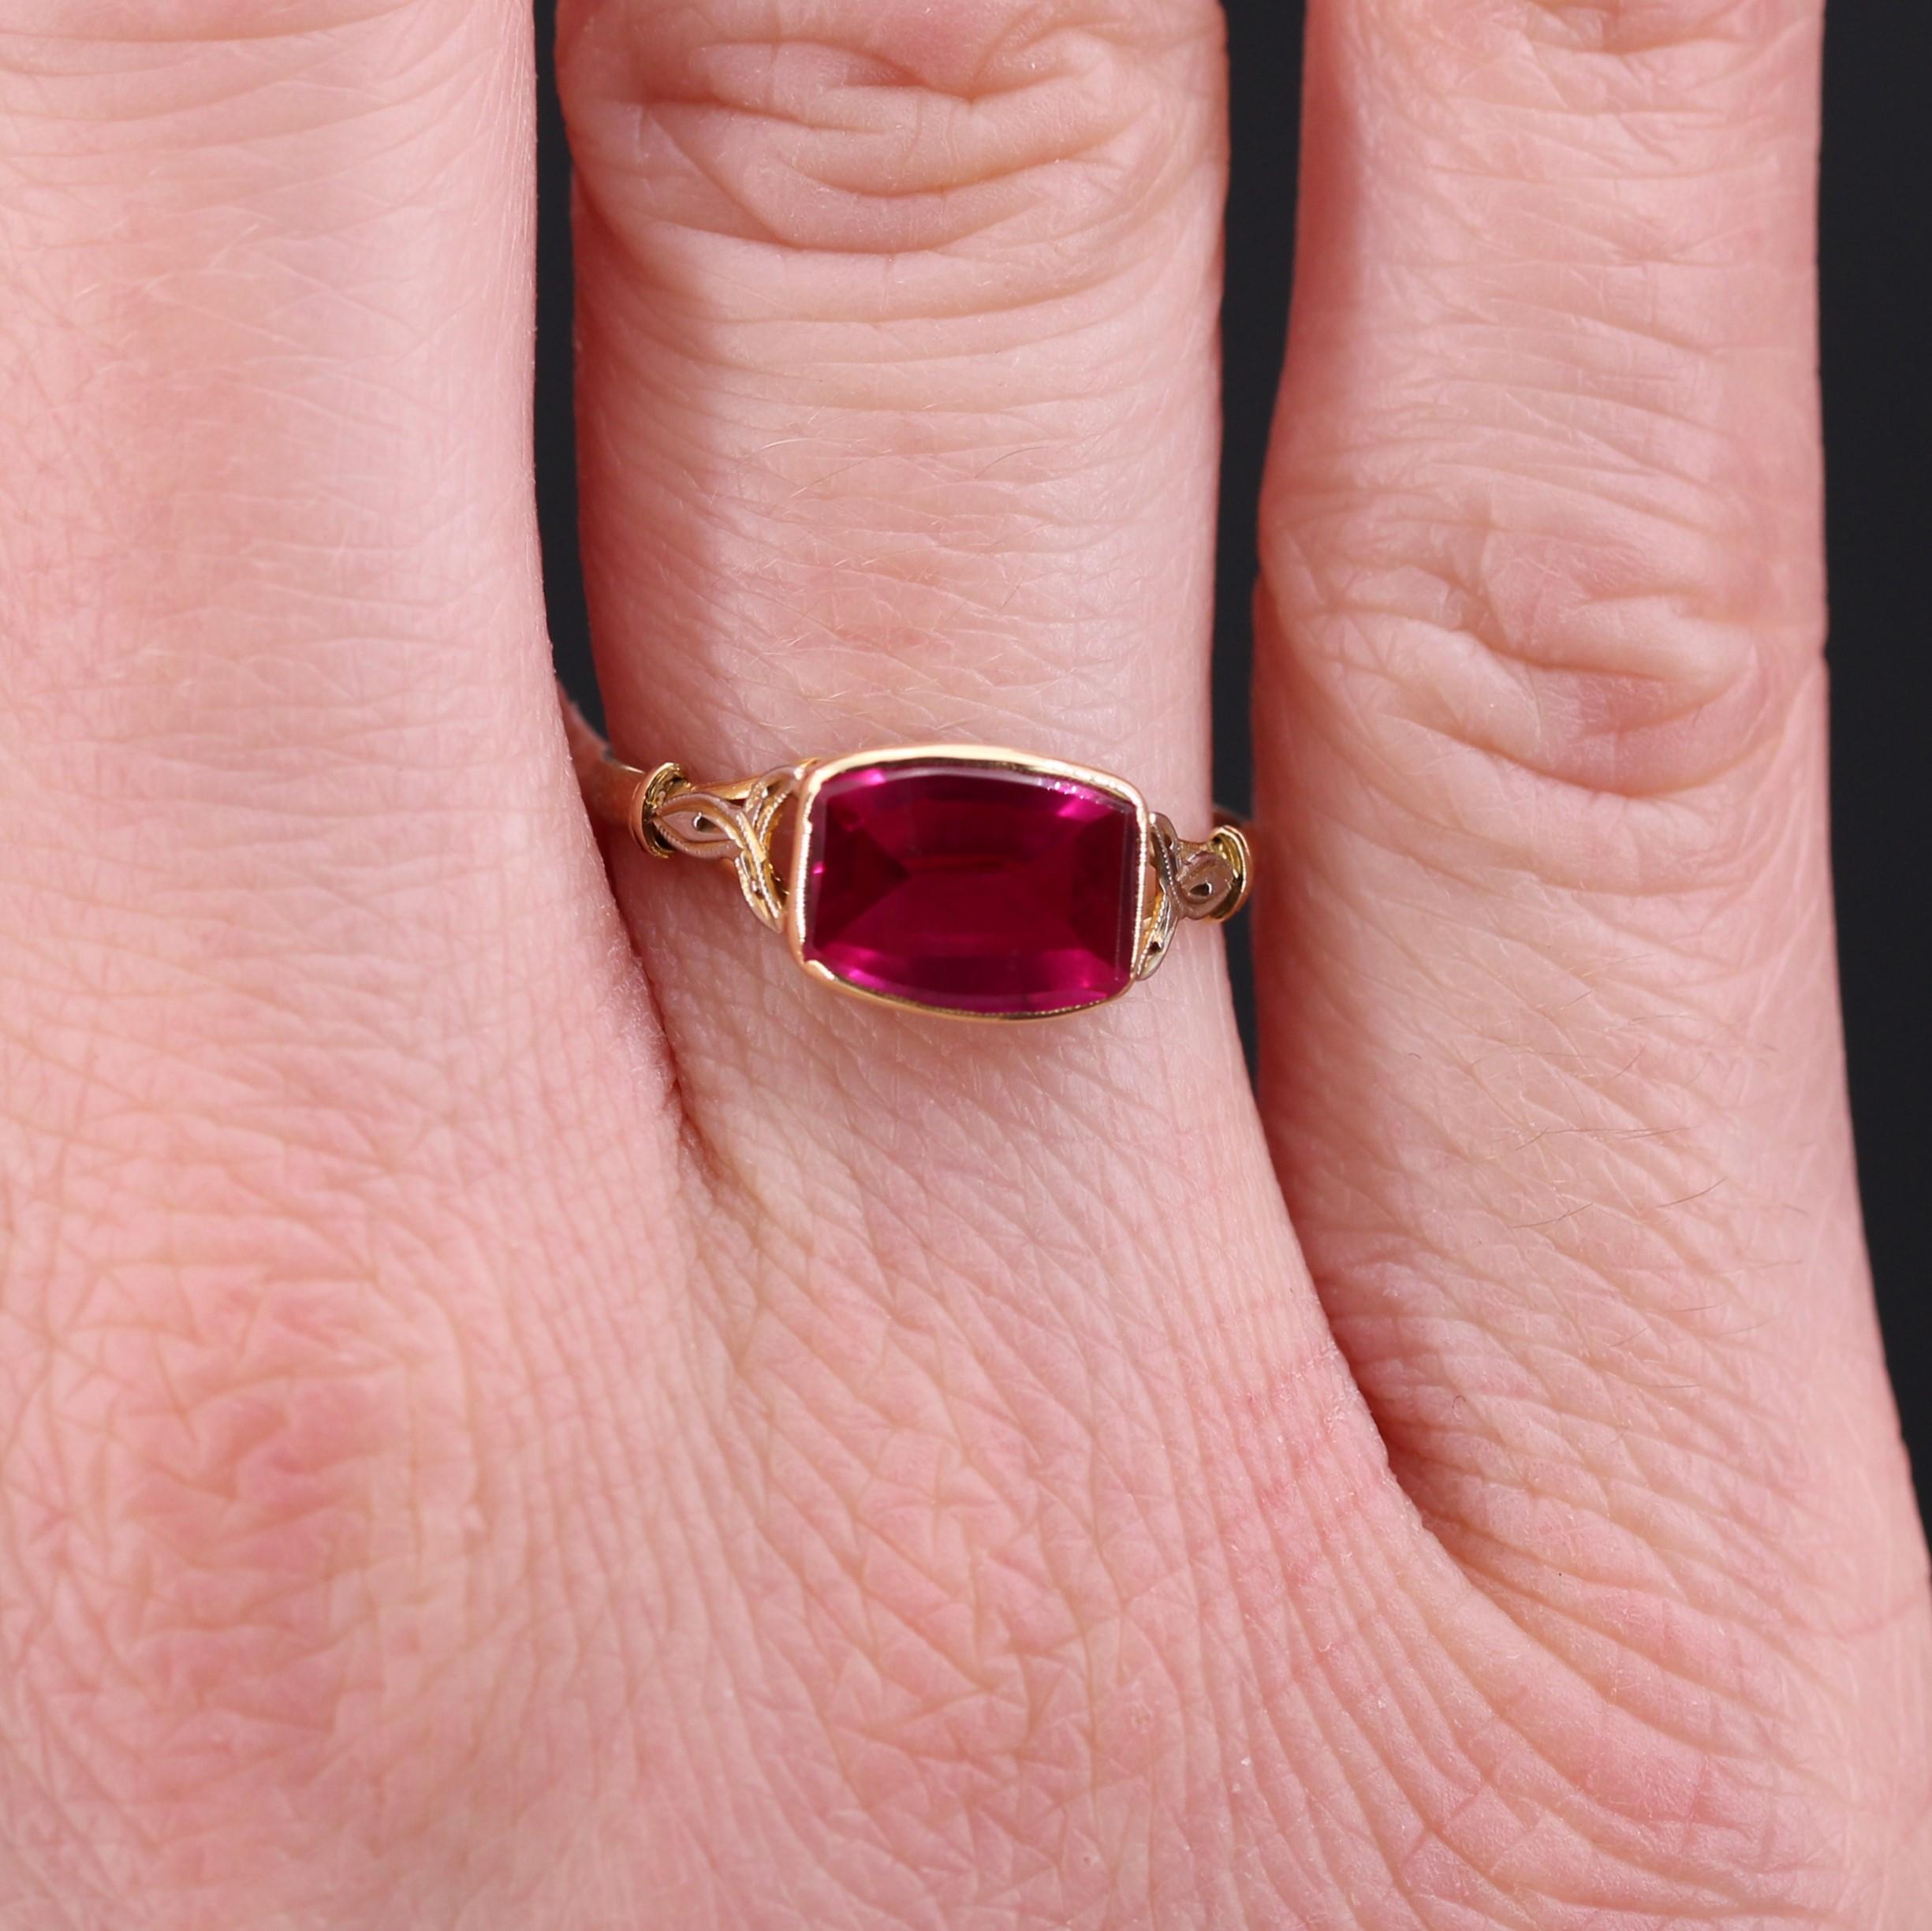 Women's French 1930s Red Gem 18 Karat Yellow Gold Ring For Sale